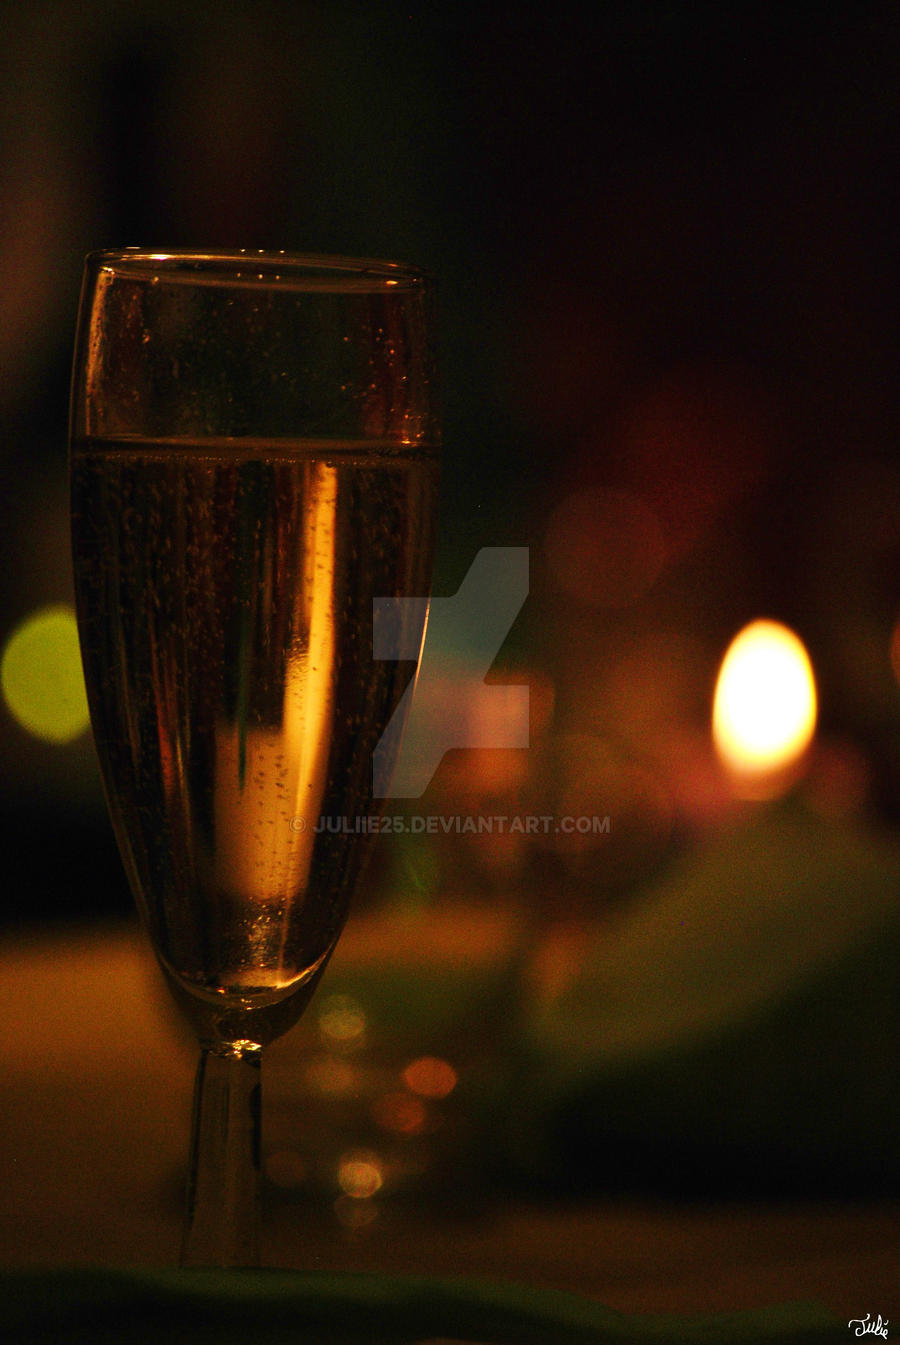 Coupe De Champagne By Juliie25 On Deviantart